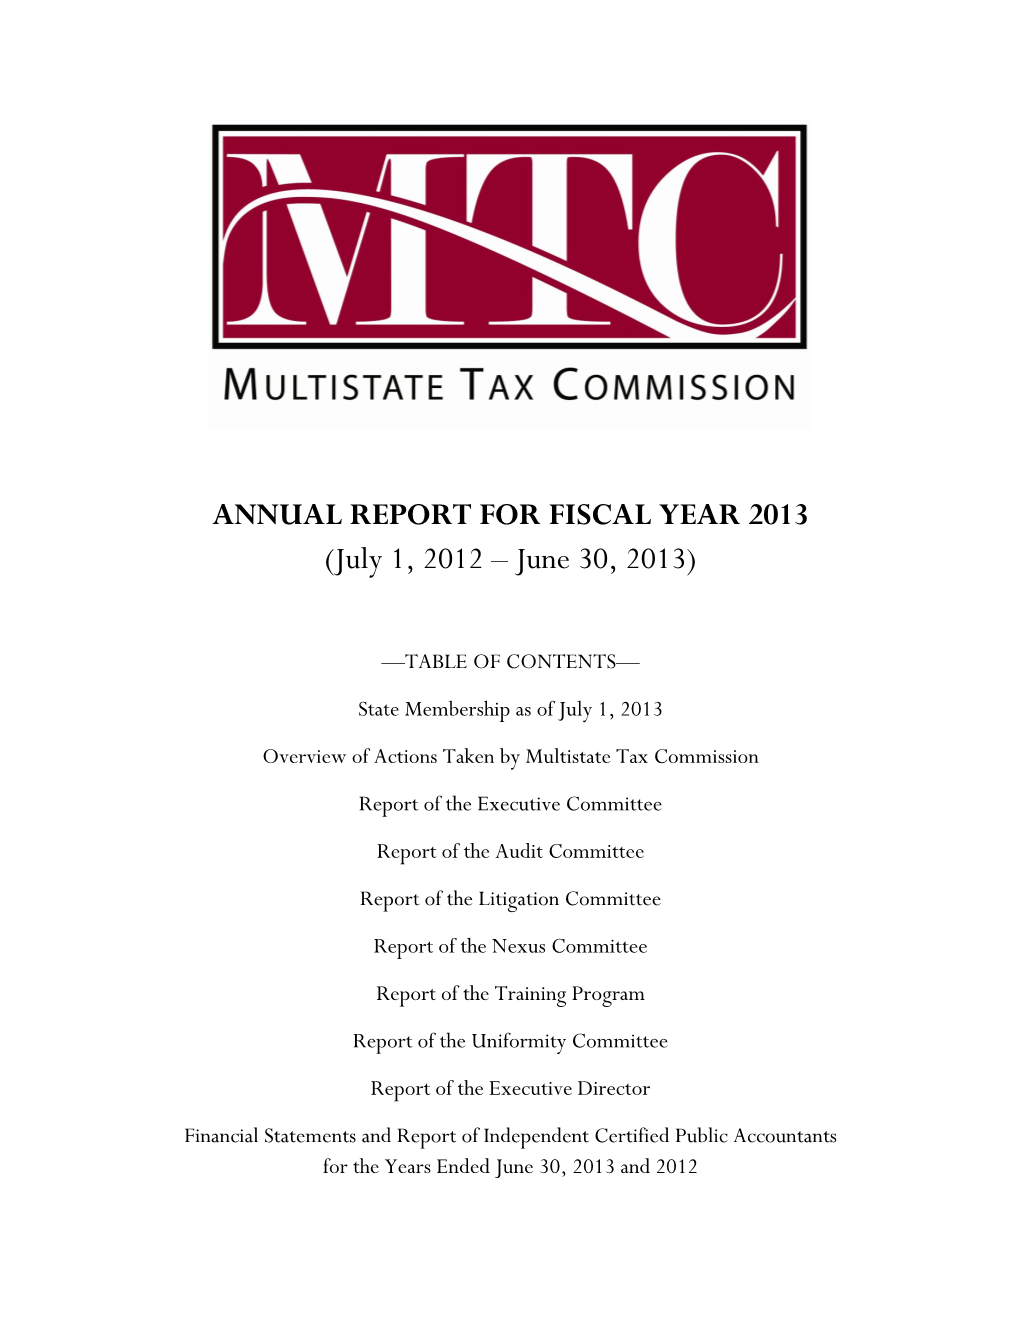 ANNUAL REPORT for FISCAL YEAR 2013 (July 1, 2012 – June 30, 2013)